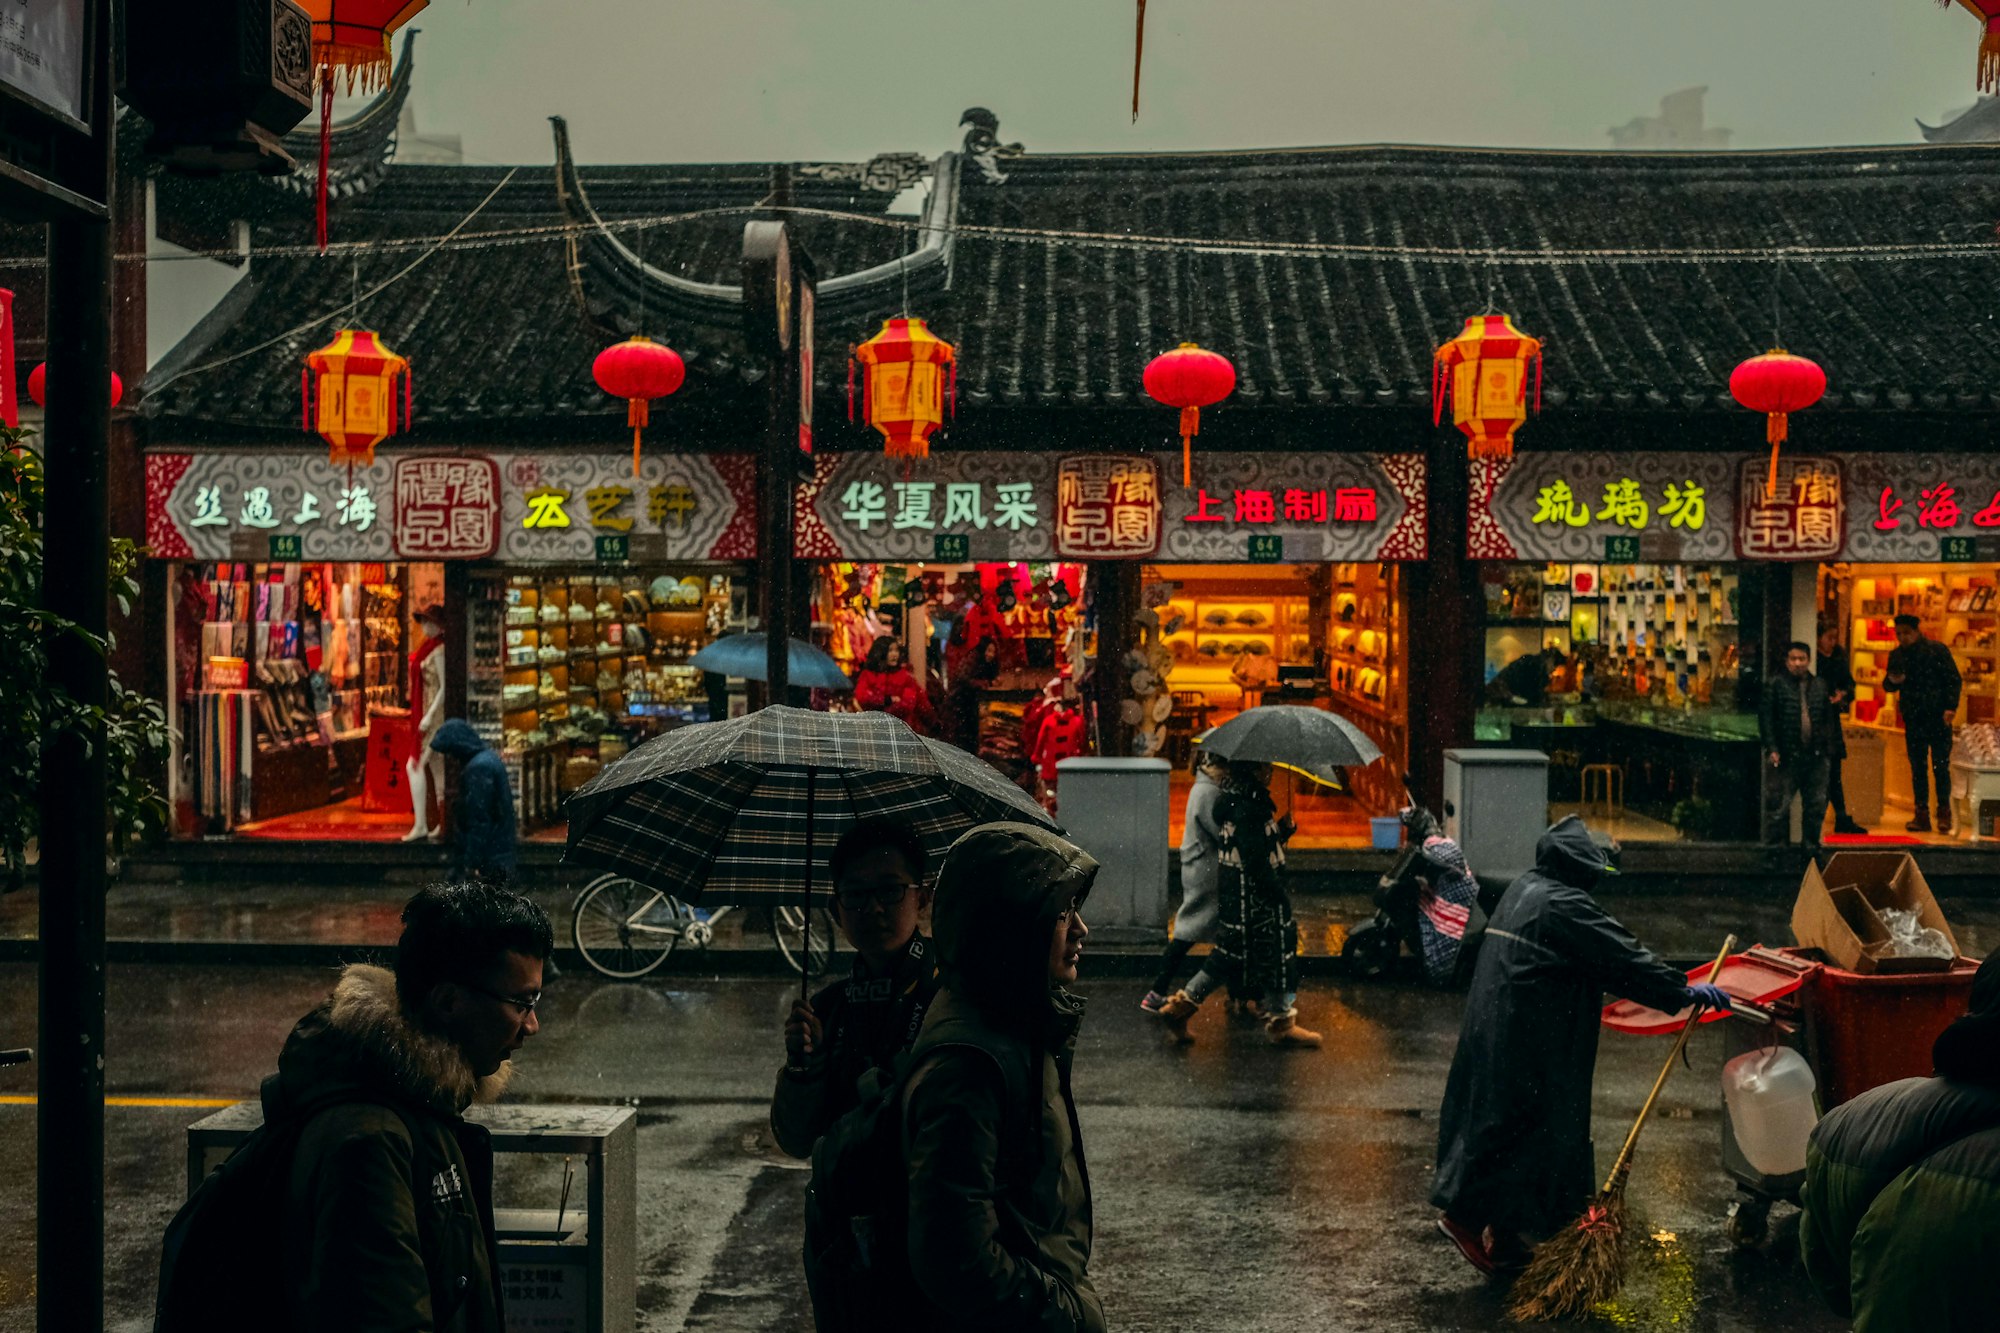 photograph of Chinese people walking through a historic alleyway in Shanghai, carrying umbrellas in the rain.